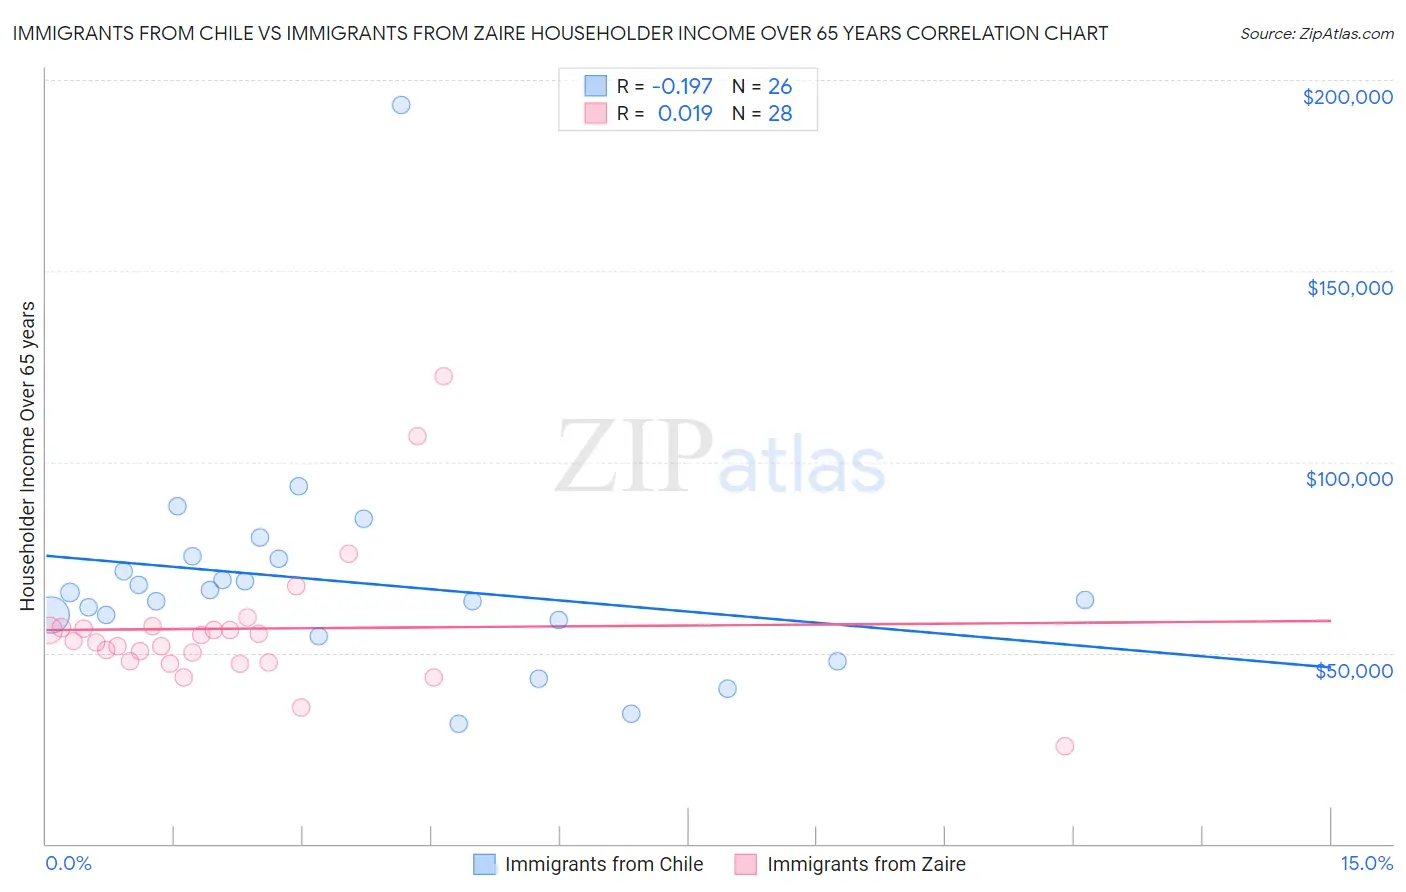 Immigrants from Chile vs Immigrants from Zaire Householder Income Over 65 years